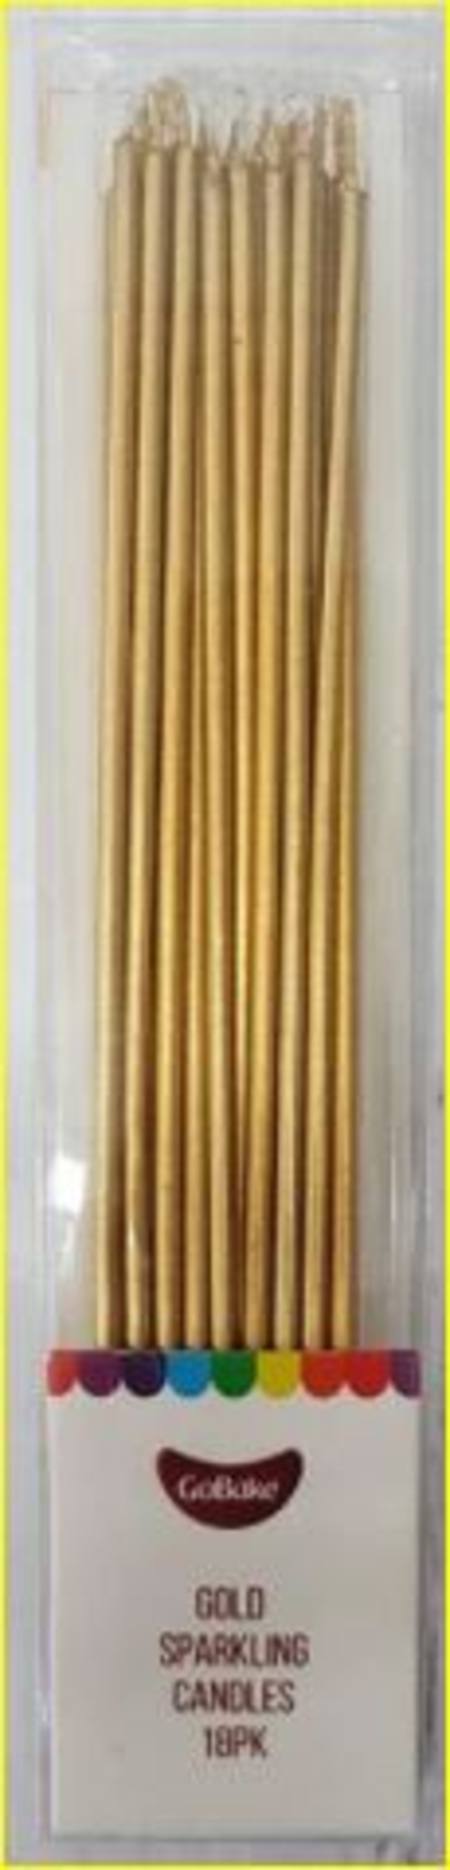 Candles Sparkling Gold, 18 pack